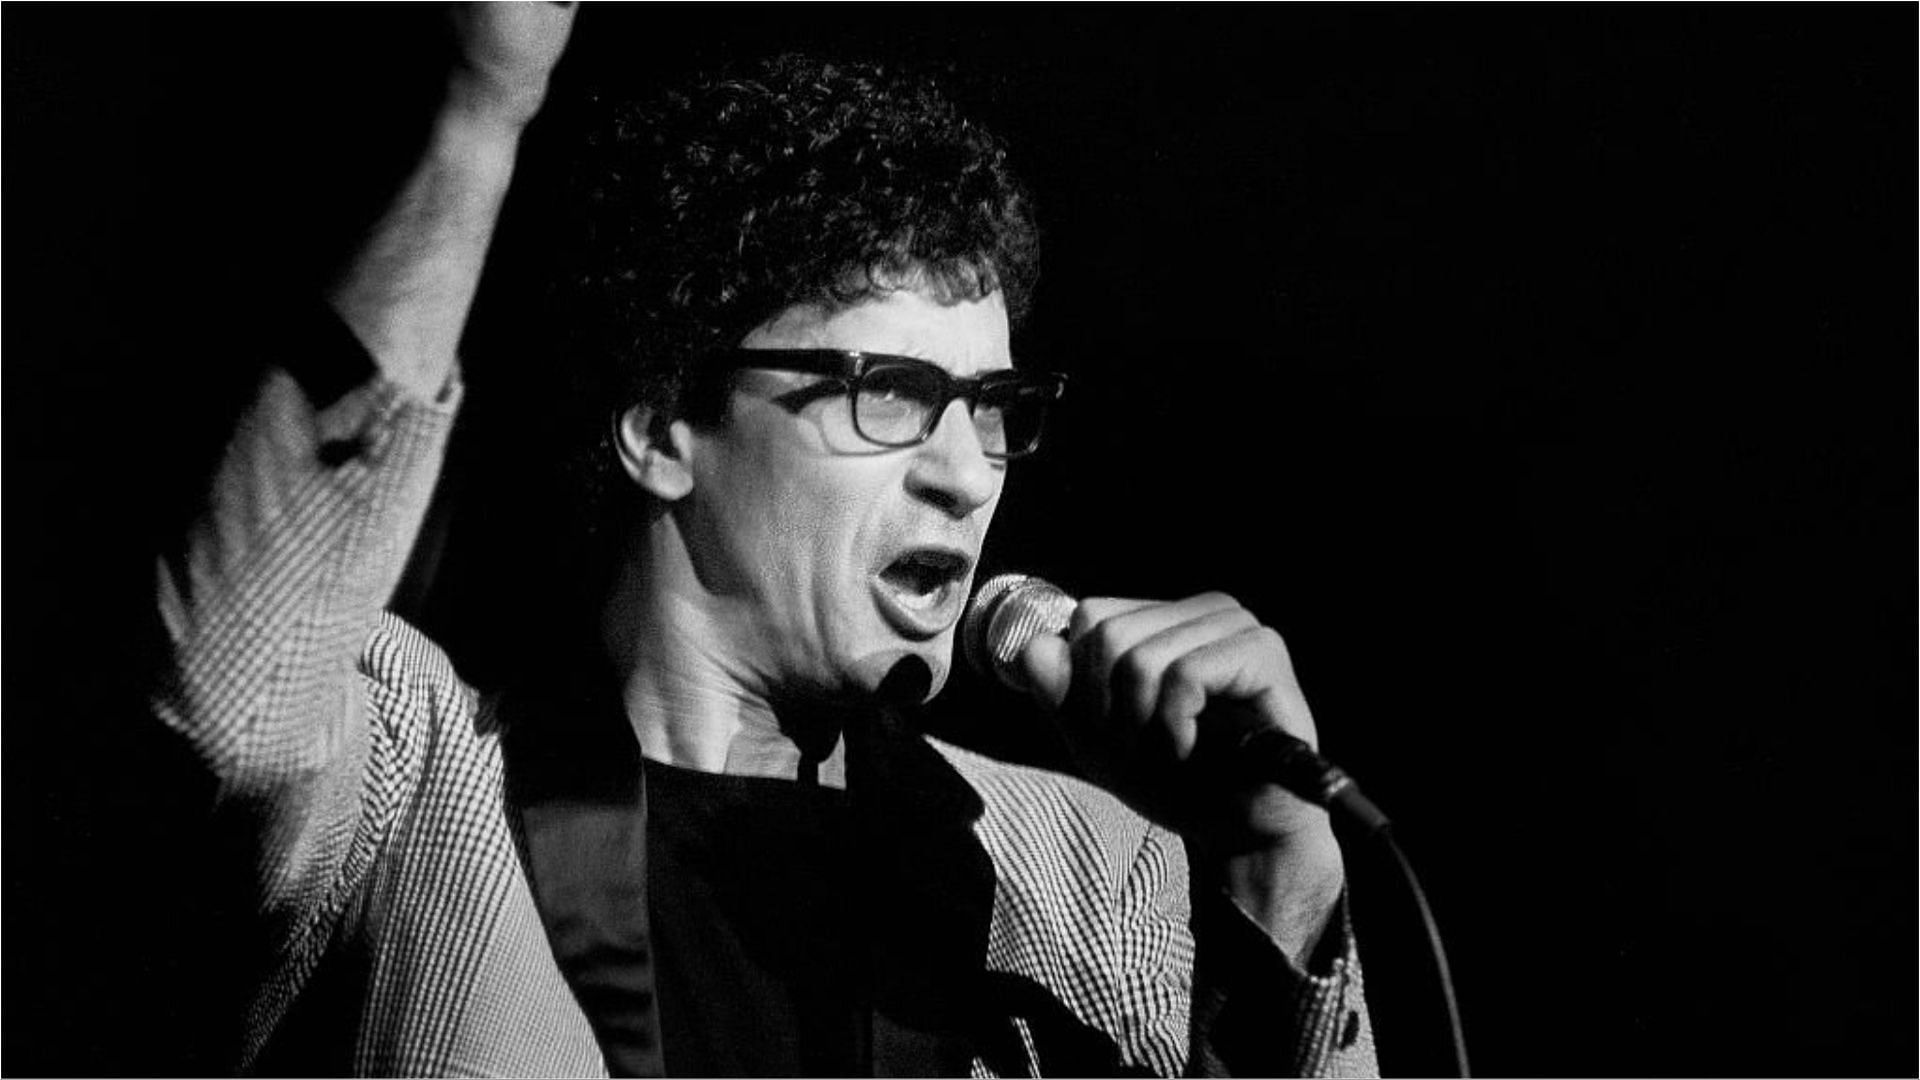 Donnie Iris has canceled his upcoming performance due to his cancer diagnosis (Image via Paul Natkin/Getty Images)